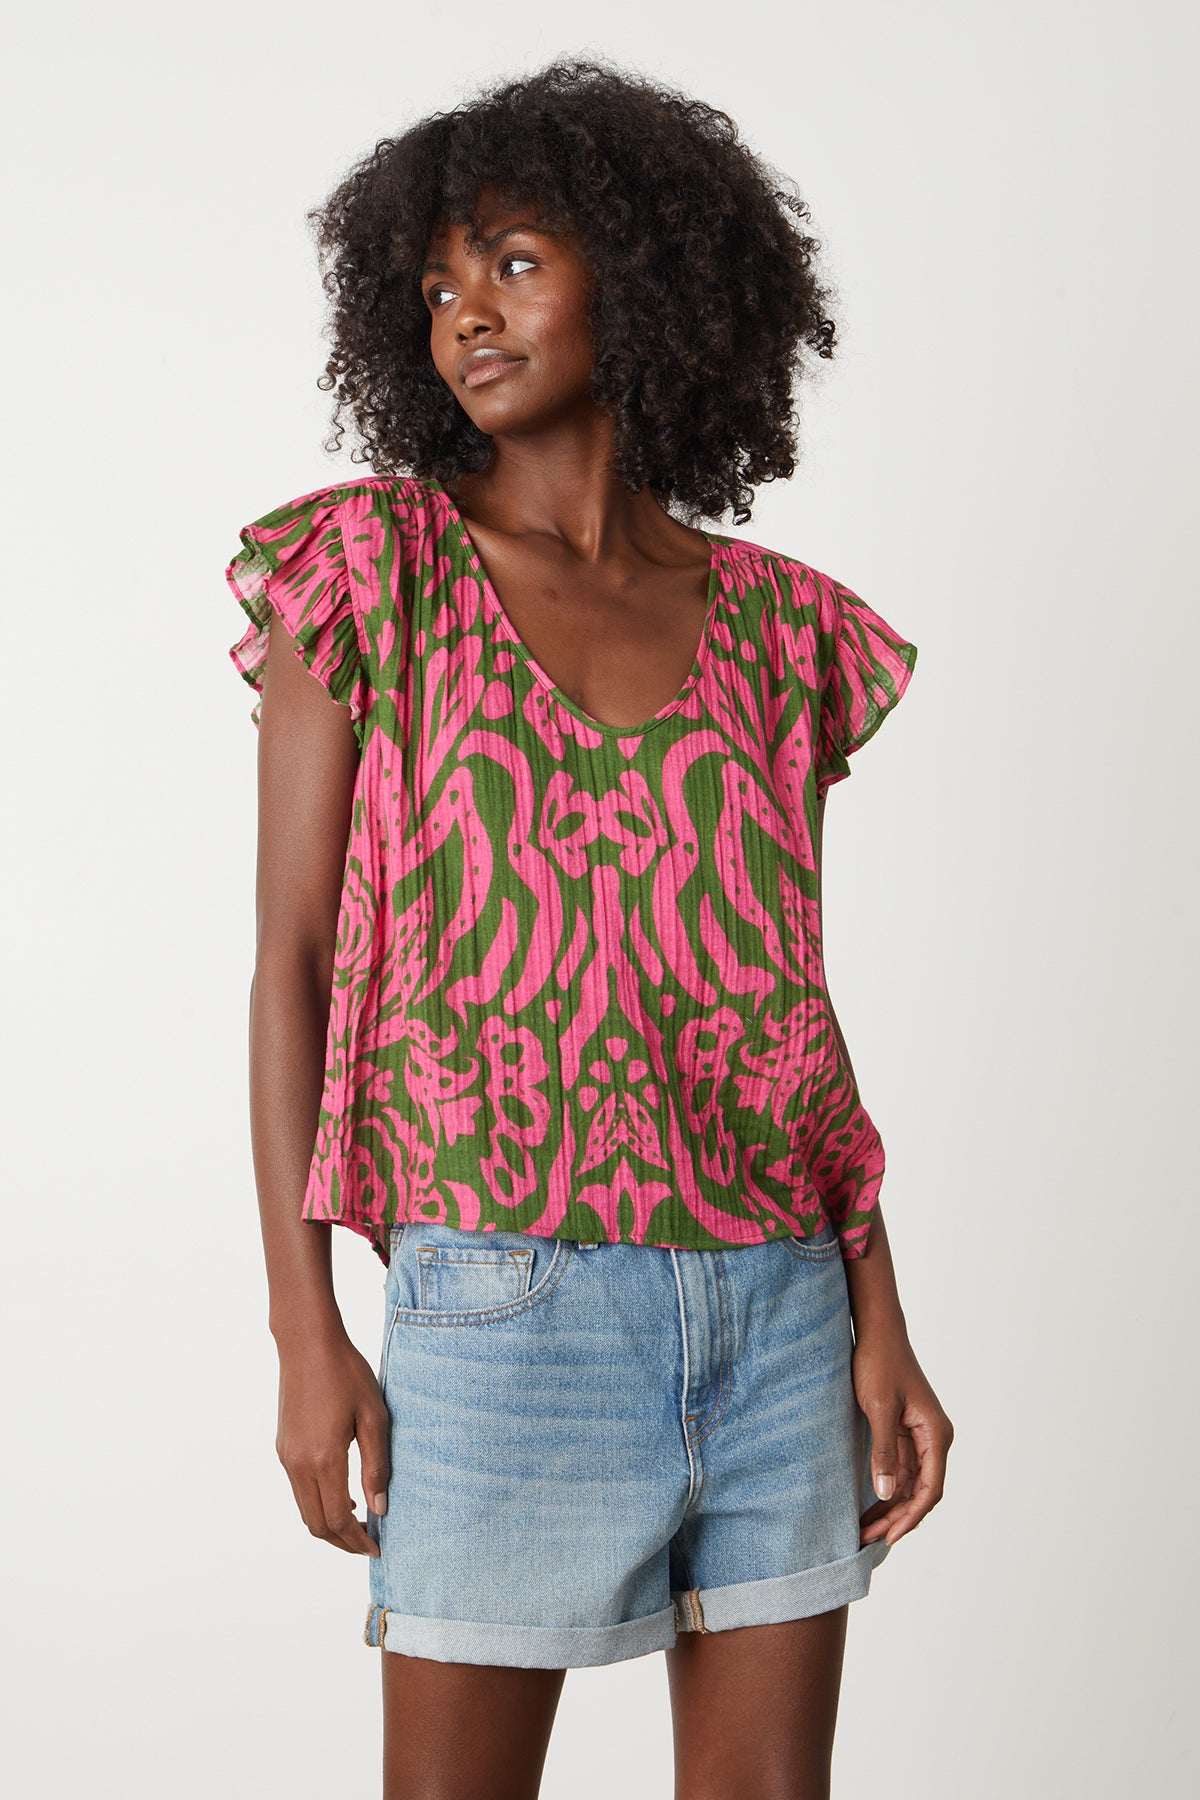   The model is wearing a Velvet by Graham & Spencer ALEAH PRINTED COTTON GAUZE TOP with ruffles. 